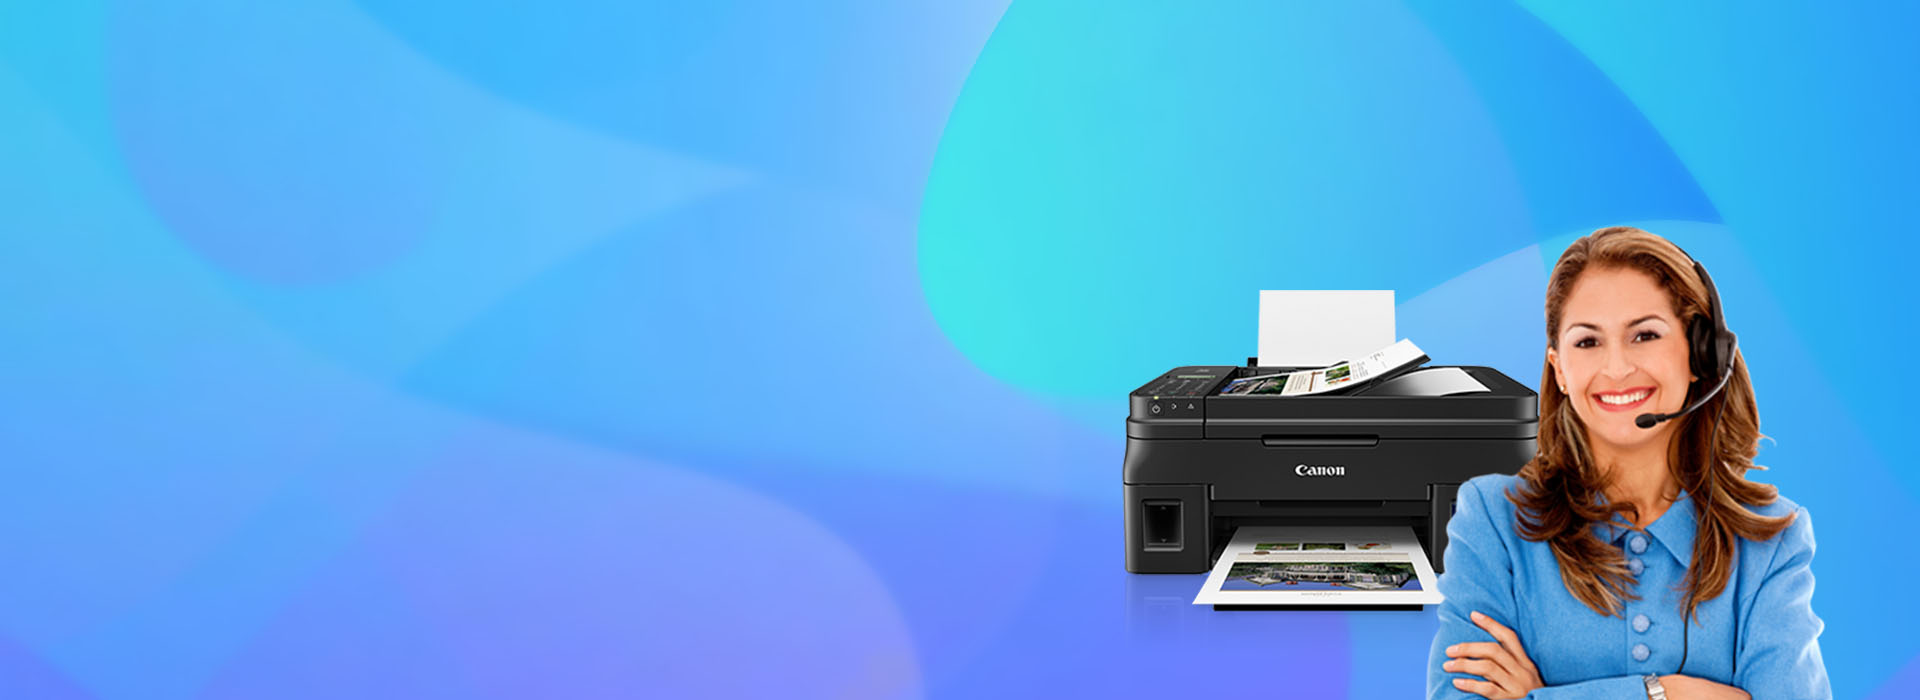 Article about What Is the Way to Setup Newly Canon Series Printer For your Device